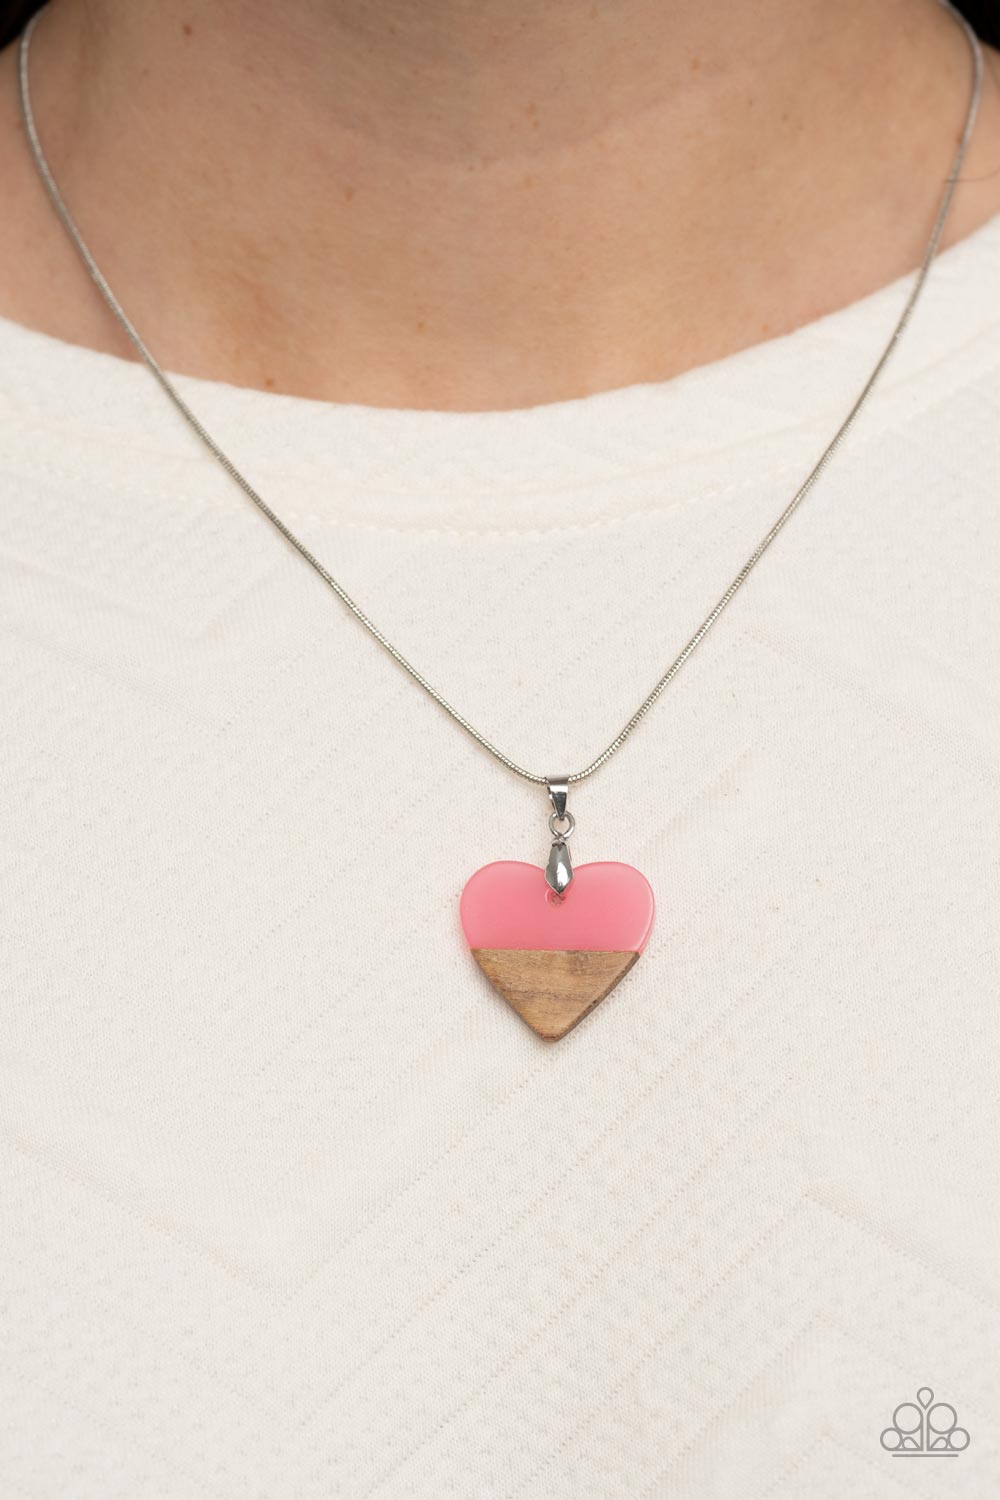 You Complete Me Pink Necklace - Paparazzi Accessories  The tip of a pink acrylic heart attaches to a wooden accent, resulting in a colorfully free-spirited pendant below the collar. Features an adjustable clasp closure.  Sold as one individual necklace. Includes one pair of matching earrings.